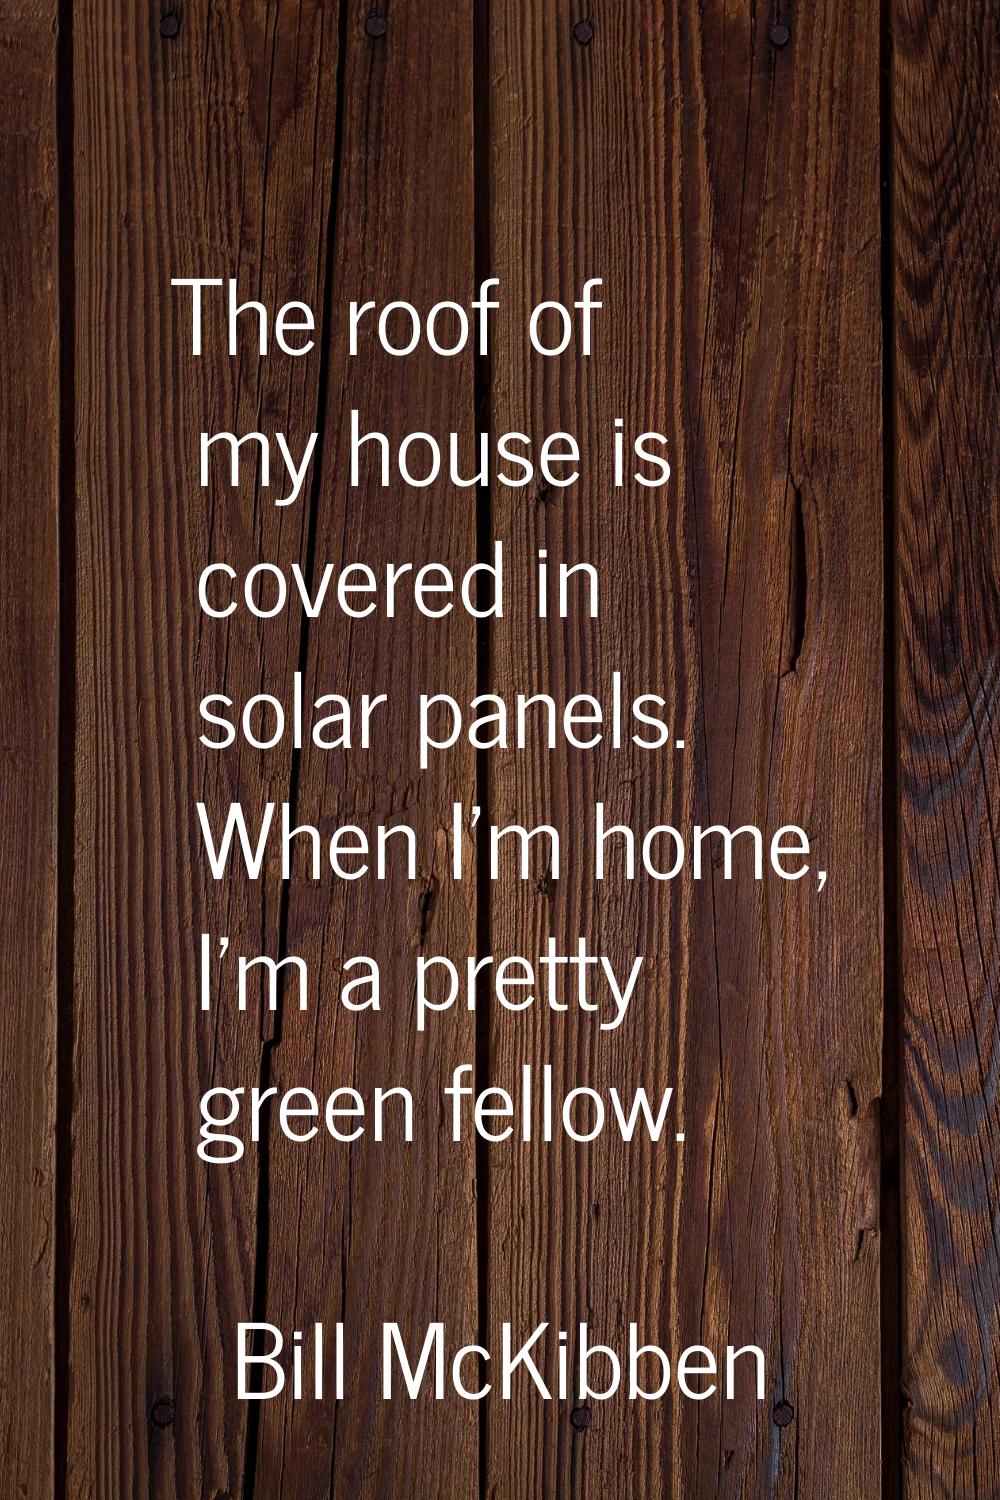 The roof of my house is covered in solar panels. When I'm home, I'm a pretty green fellow.